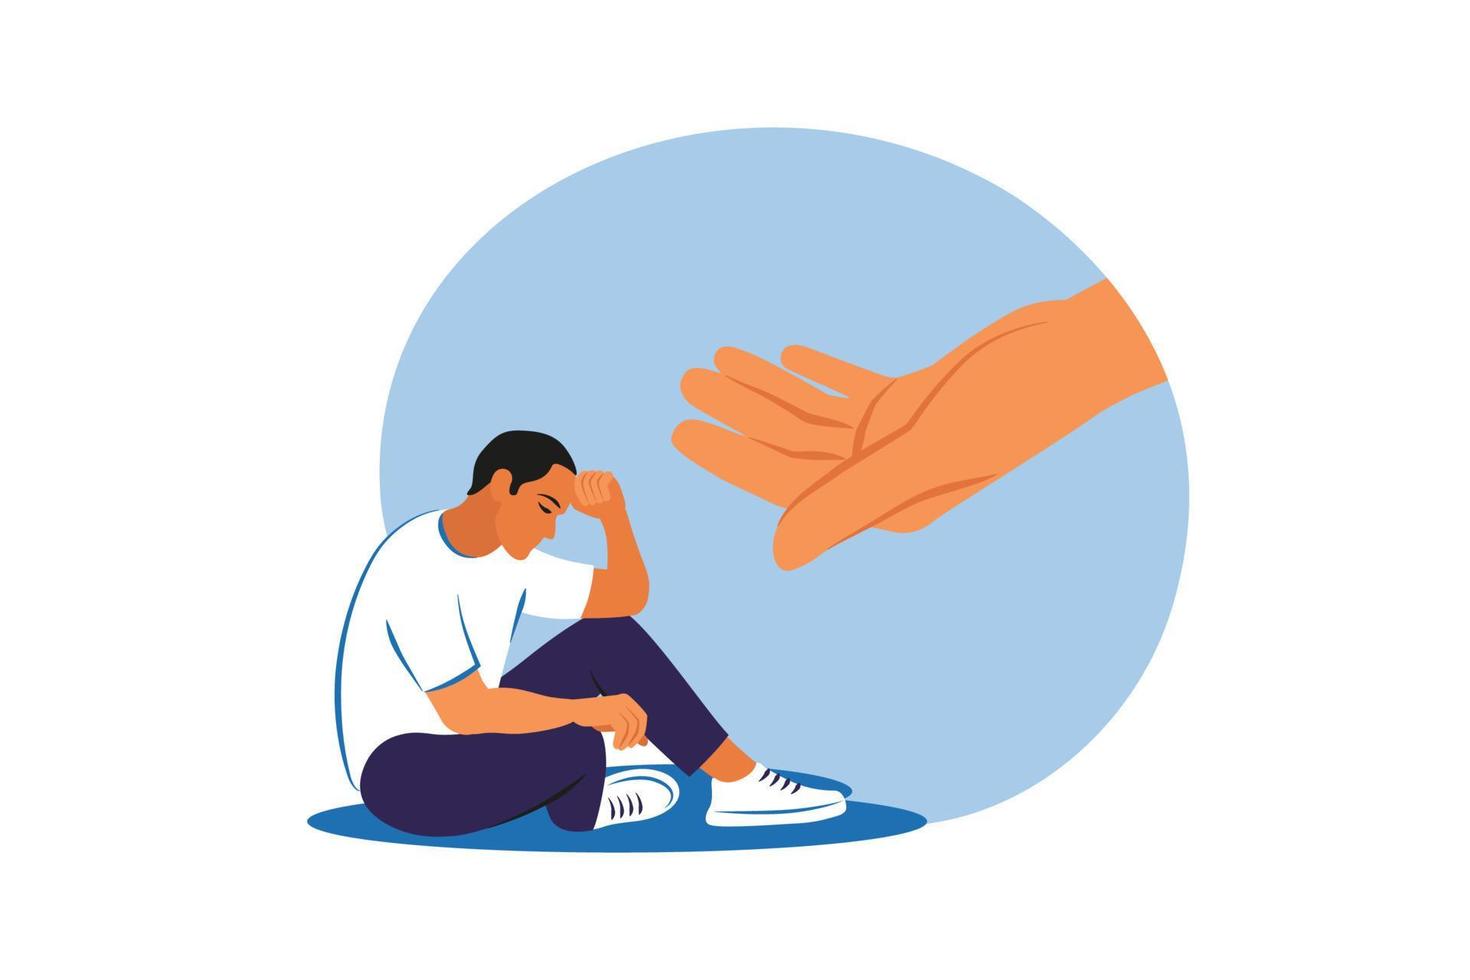 Sad man getting help and cure from stress. Psychotherapy, help and support, a counseling session concept. Helping hand. Vector illustration.